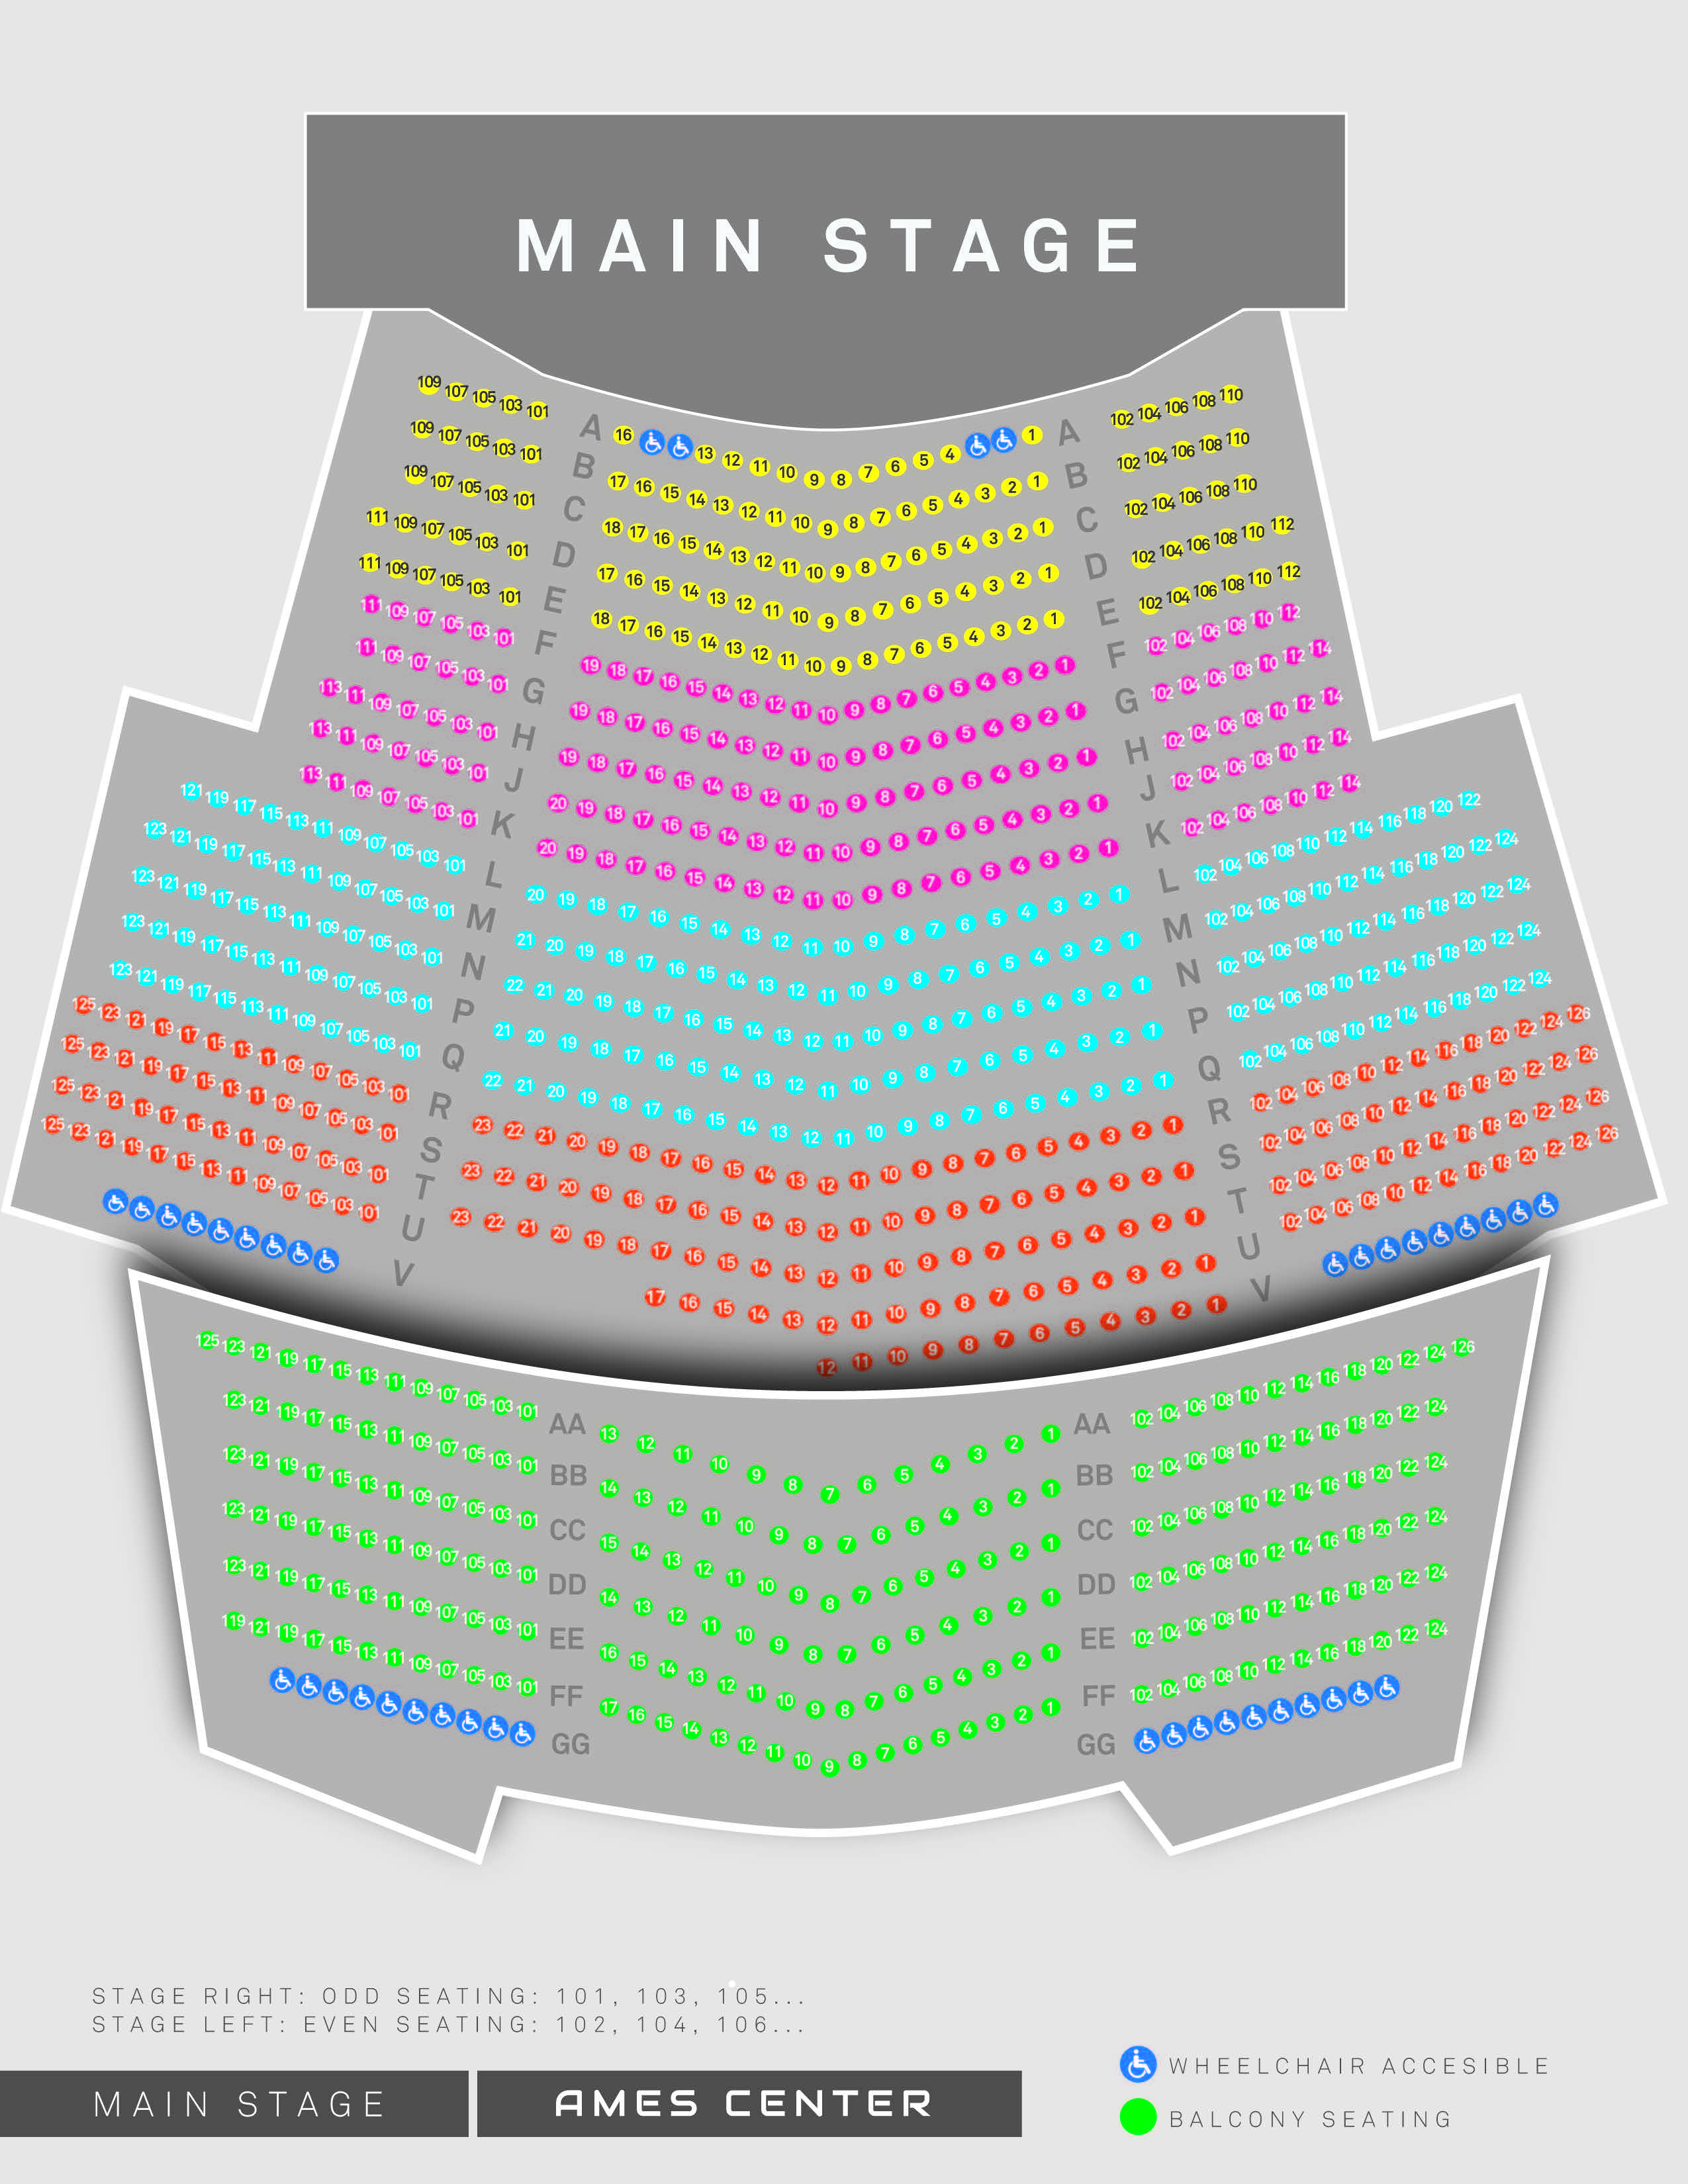 V Theater Seating Chart